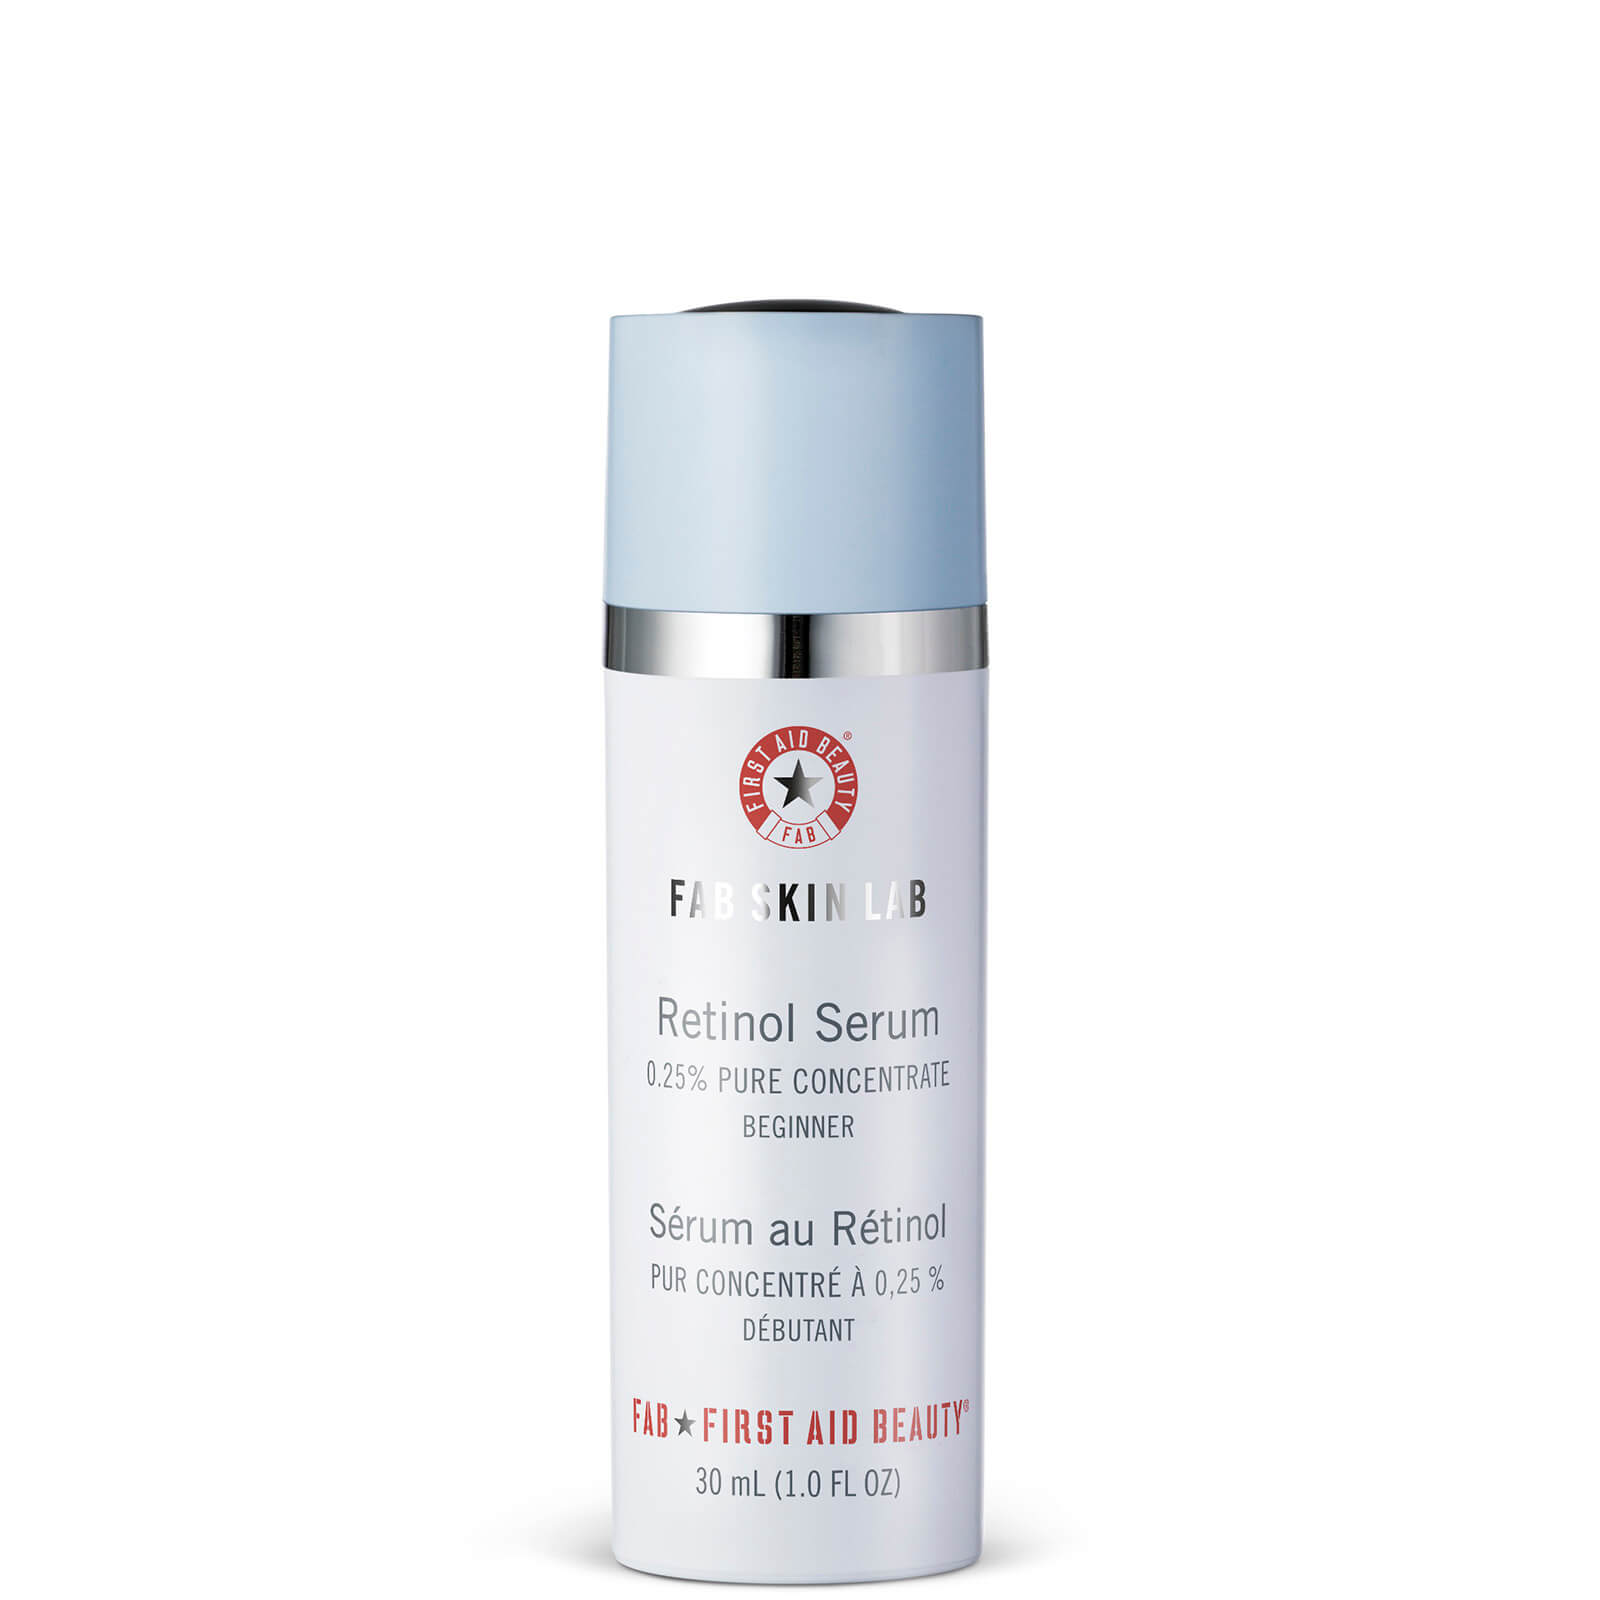 Image of First Aid Beauty Skin Lab Retinol Serum 0.25% Pure Concentrate 30ml (Sensitive/Beginner)